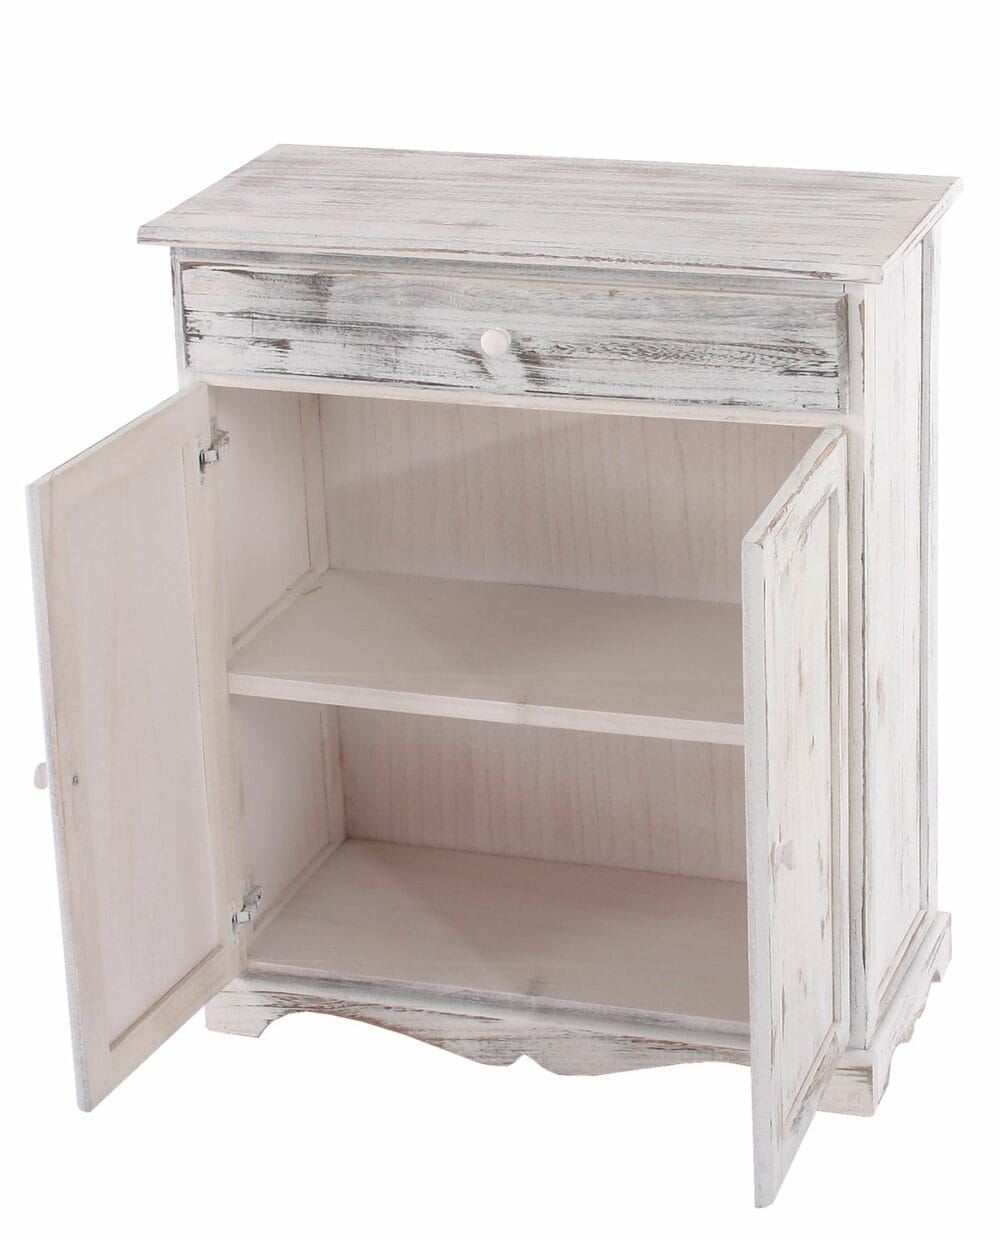 Kommode 78x66x33cm Shabby-Look Vintage ~ weiss